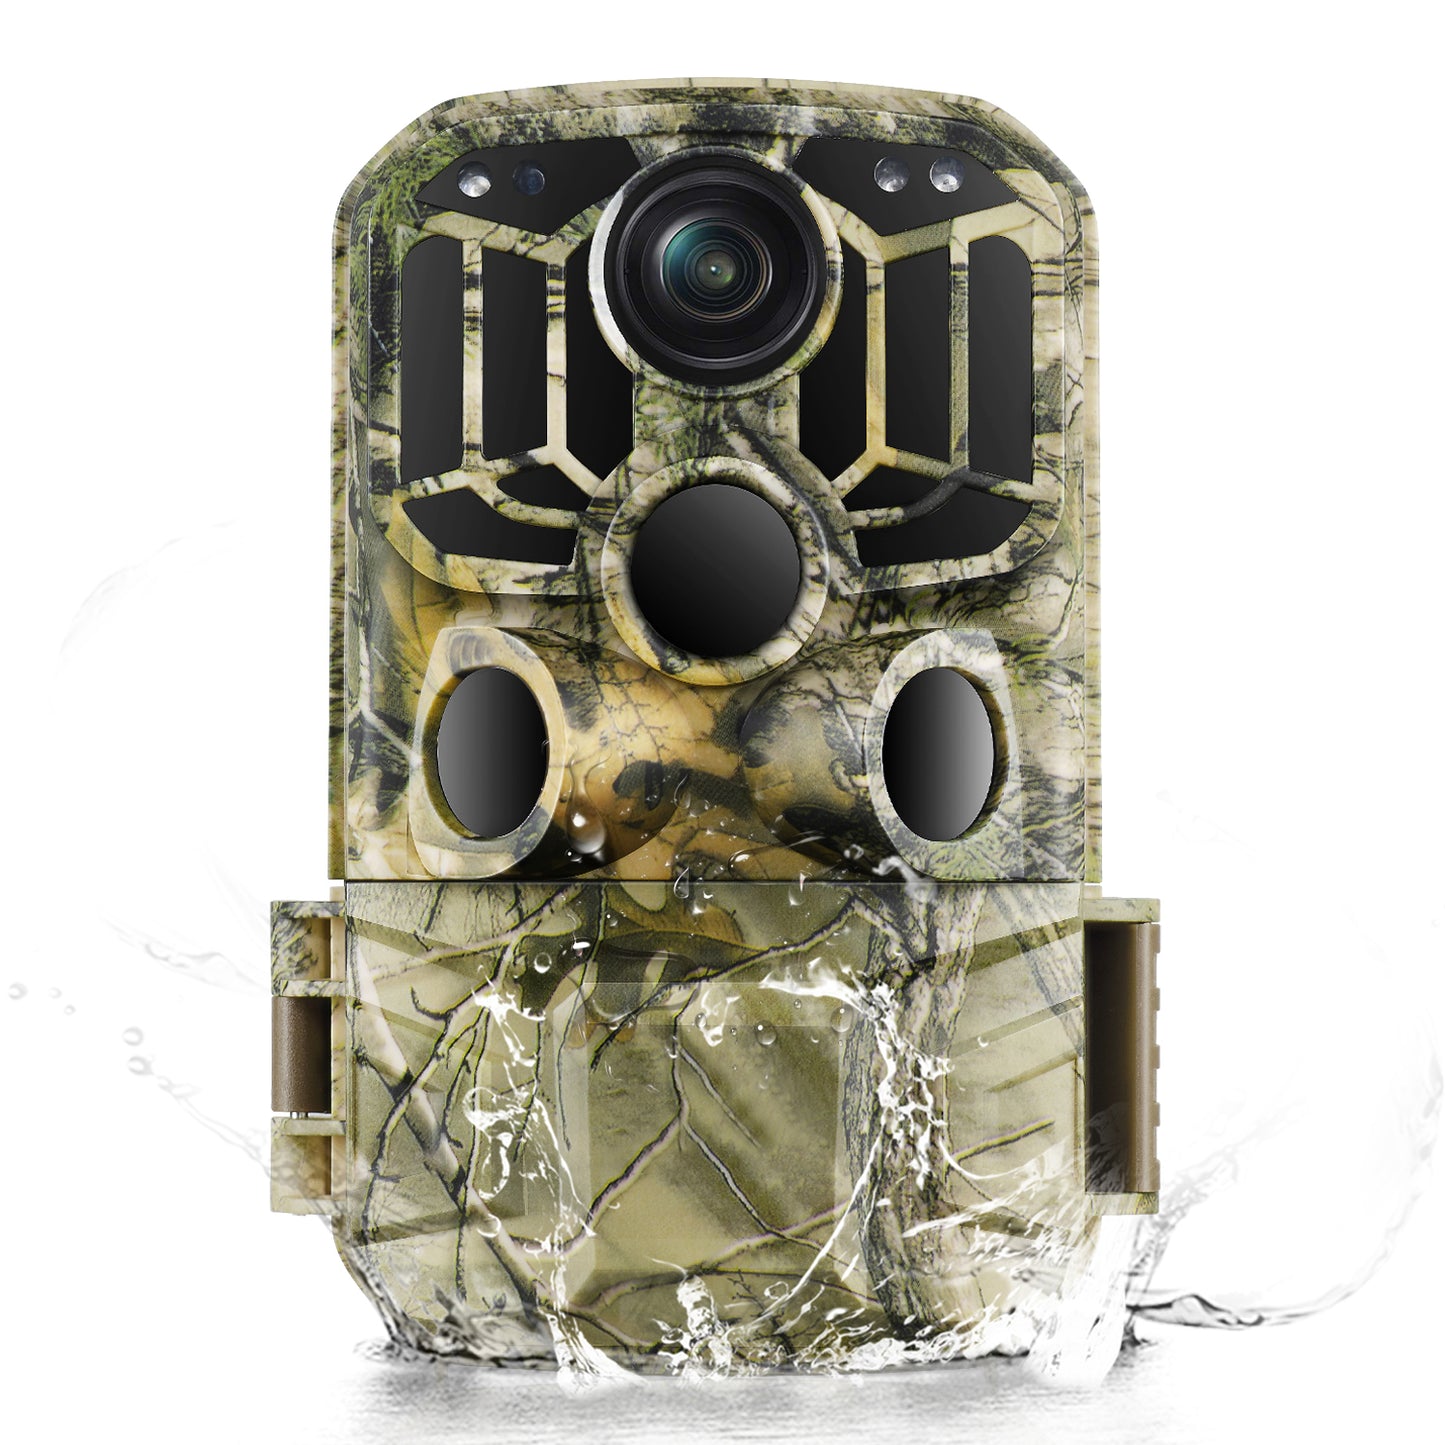 CAMPARK Trail Camera WiFi Buletooth 20MP 1296P Game Hunting Camera Infrared Night Vision Waterproof IP66 Motion Activated 2.4" Color TFT LCD Trail Cam for Wildlife Monitor